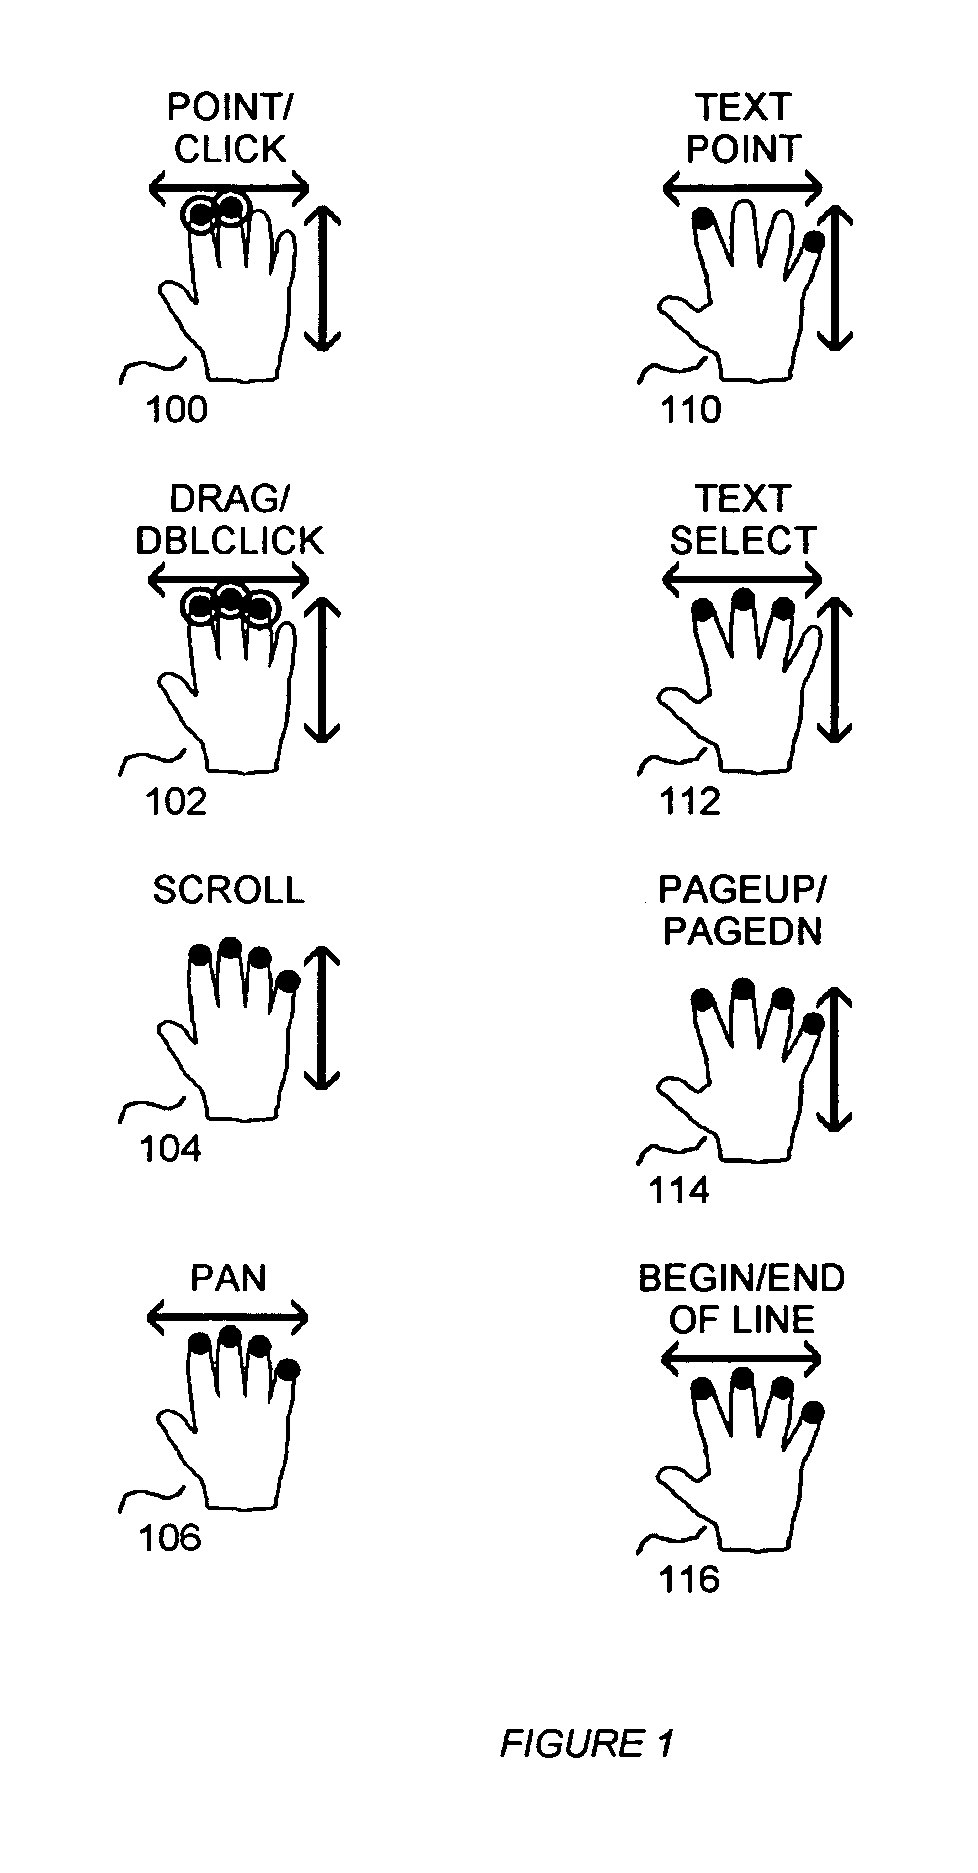 System and method for packing multi-touch gestures onto a hand